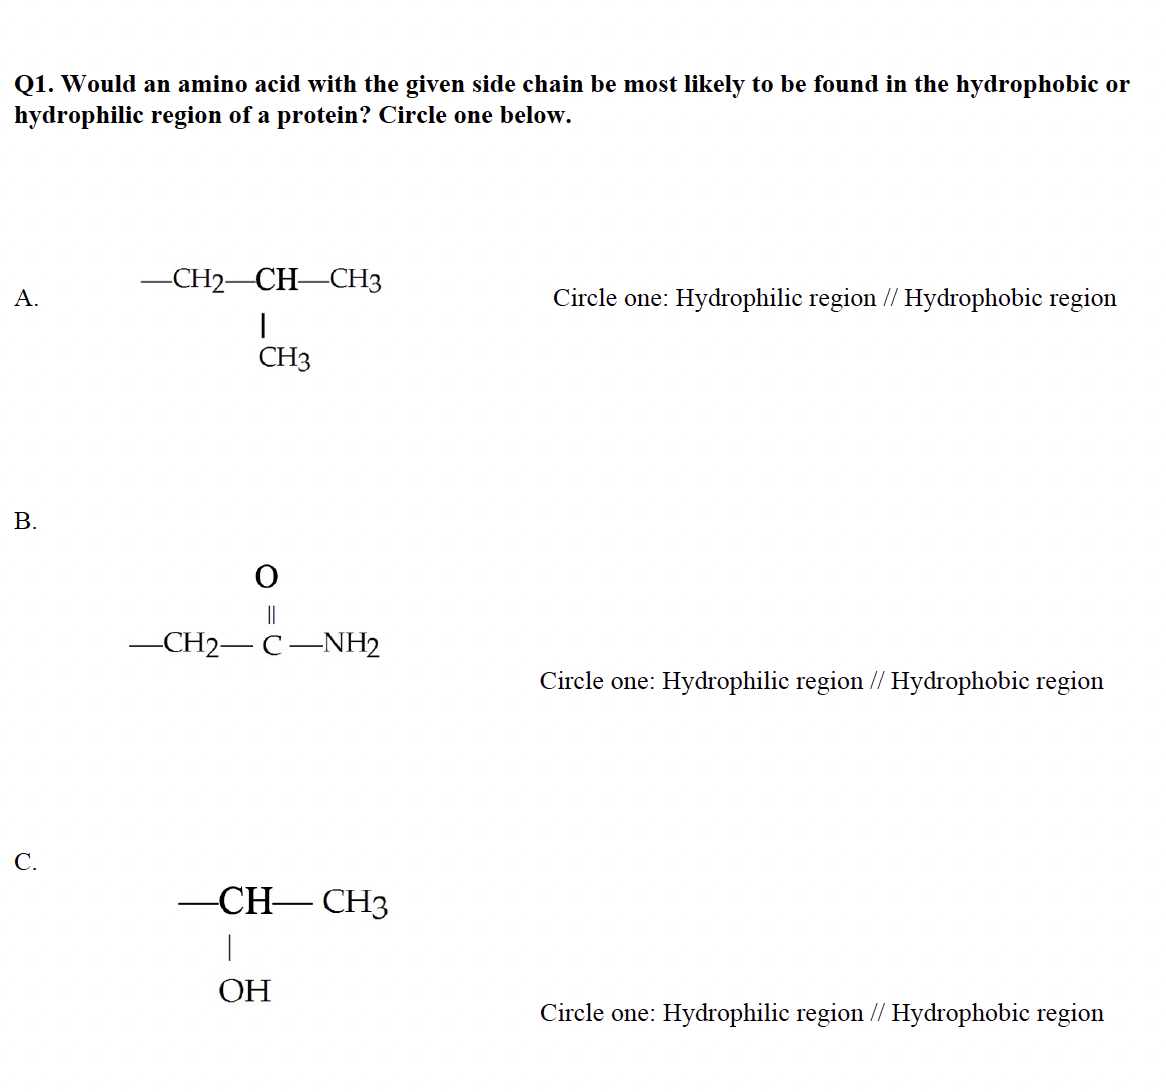 Q1. Would an amino acid with the given side chain be most likely to be found in the hydrophobic or
hydrophilic region of a protein? Circle one below.
A.
B.
C.
-CH₂-CH-CH3
I
CH3
O
-CH2-C-NH2
-CH-CH3
|
ОН
Circle one: Hydrophilic region // Hydrophobic region
Circle one: Hydrophilic region // Hydrophobic region
Circle one: Hydrophilic region // Hydrophobic region